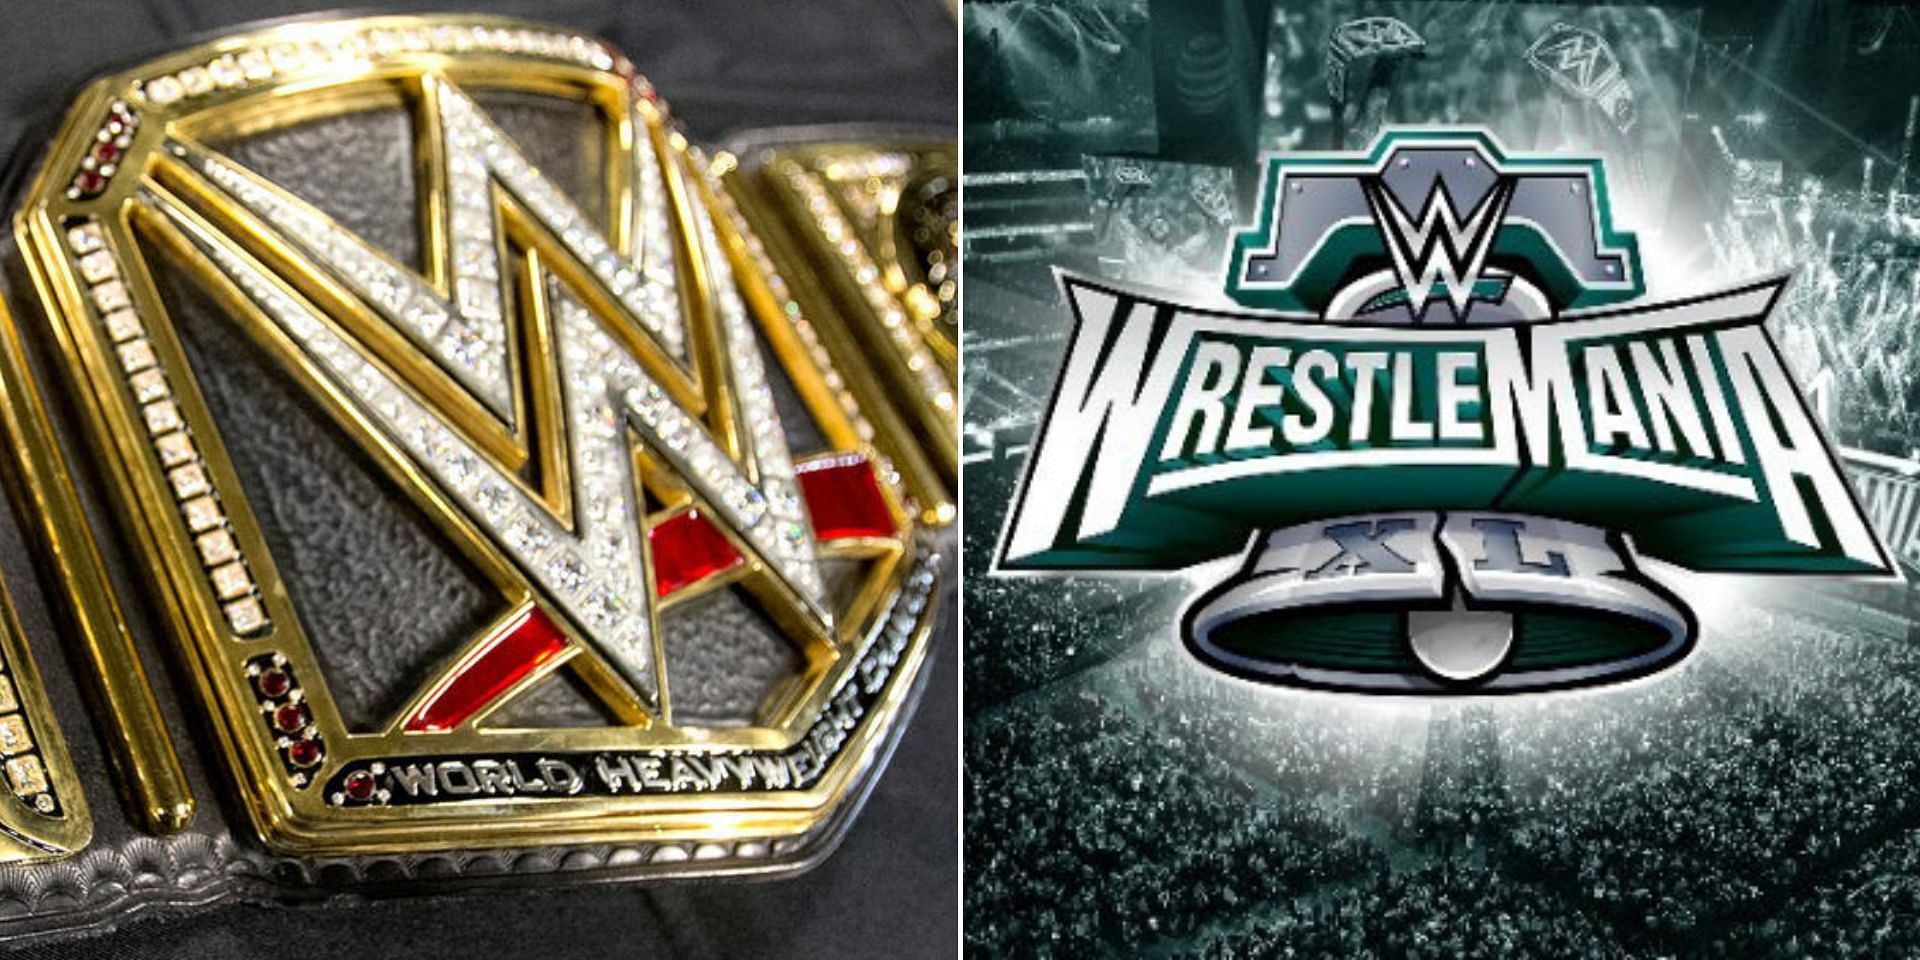 A former WWE Champion issued a match for WrestleMania